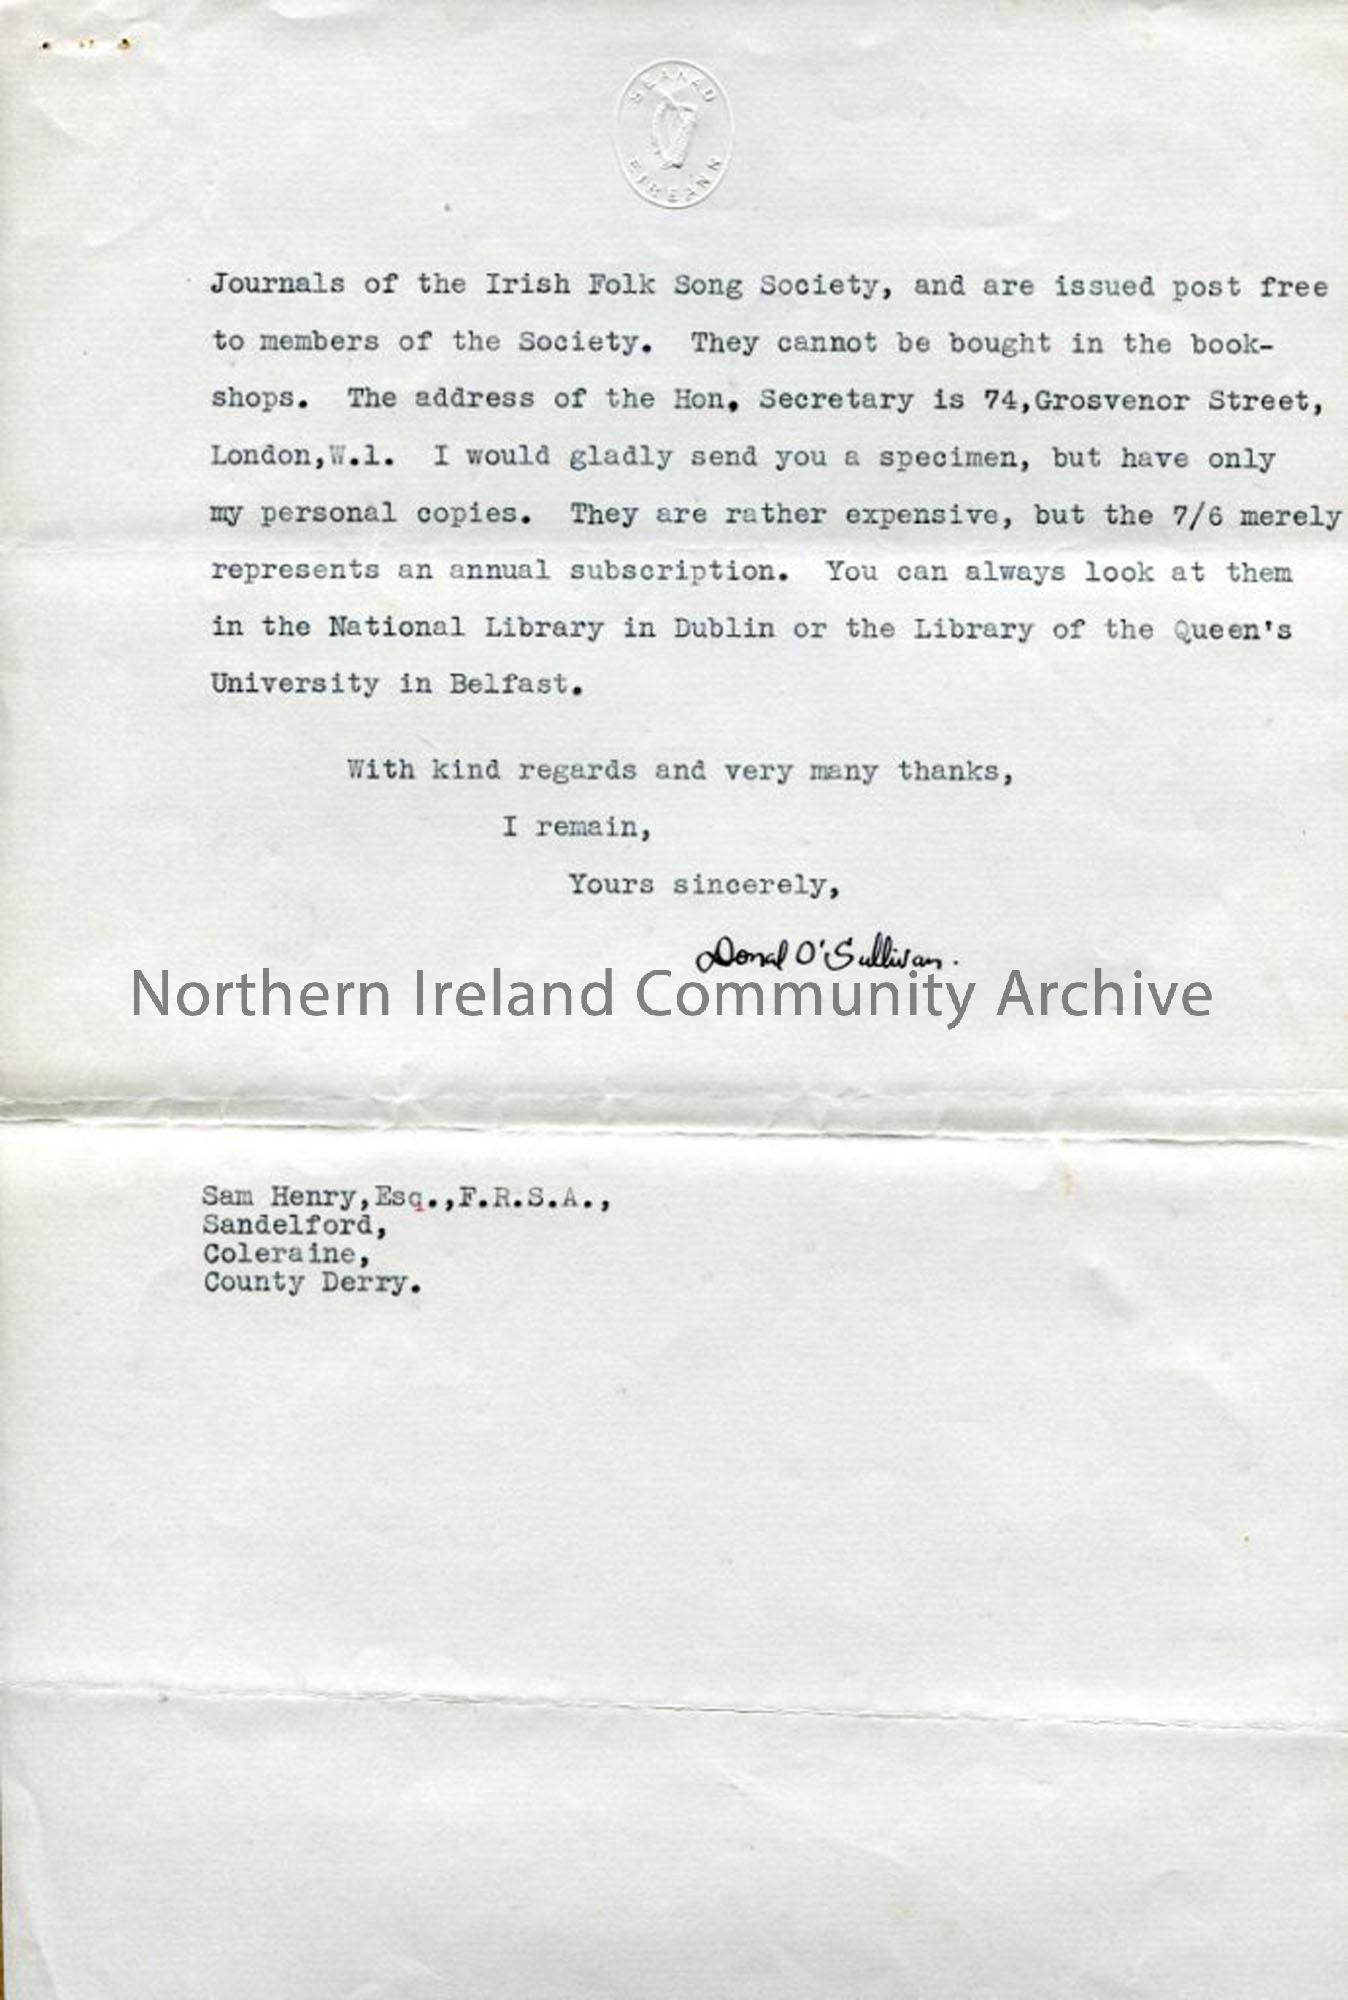 Page two of two – Letter from Donal O’Sullivan, 28.7.1936